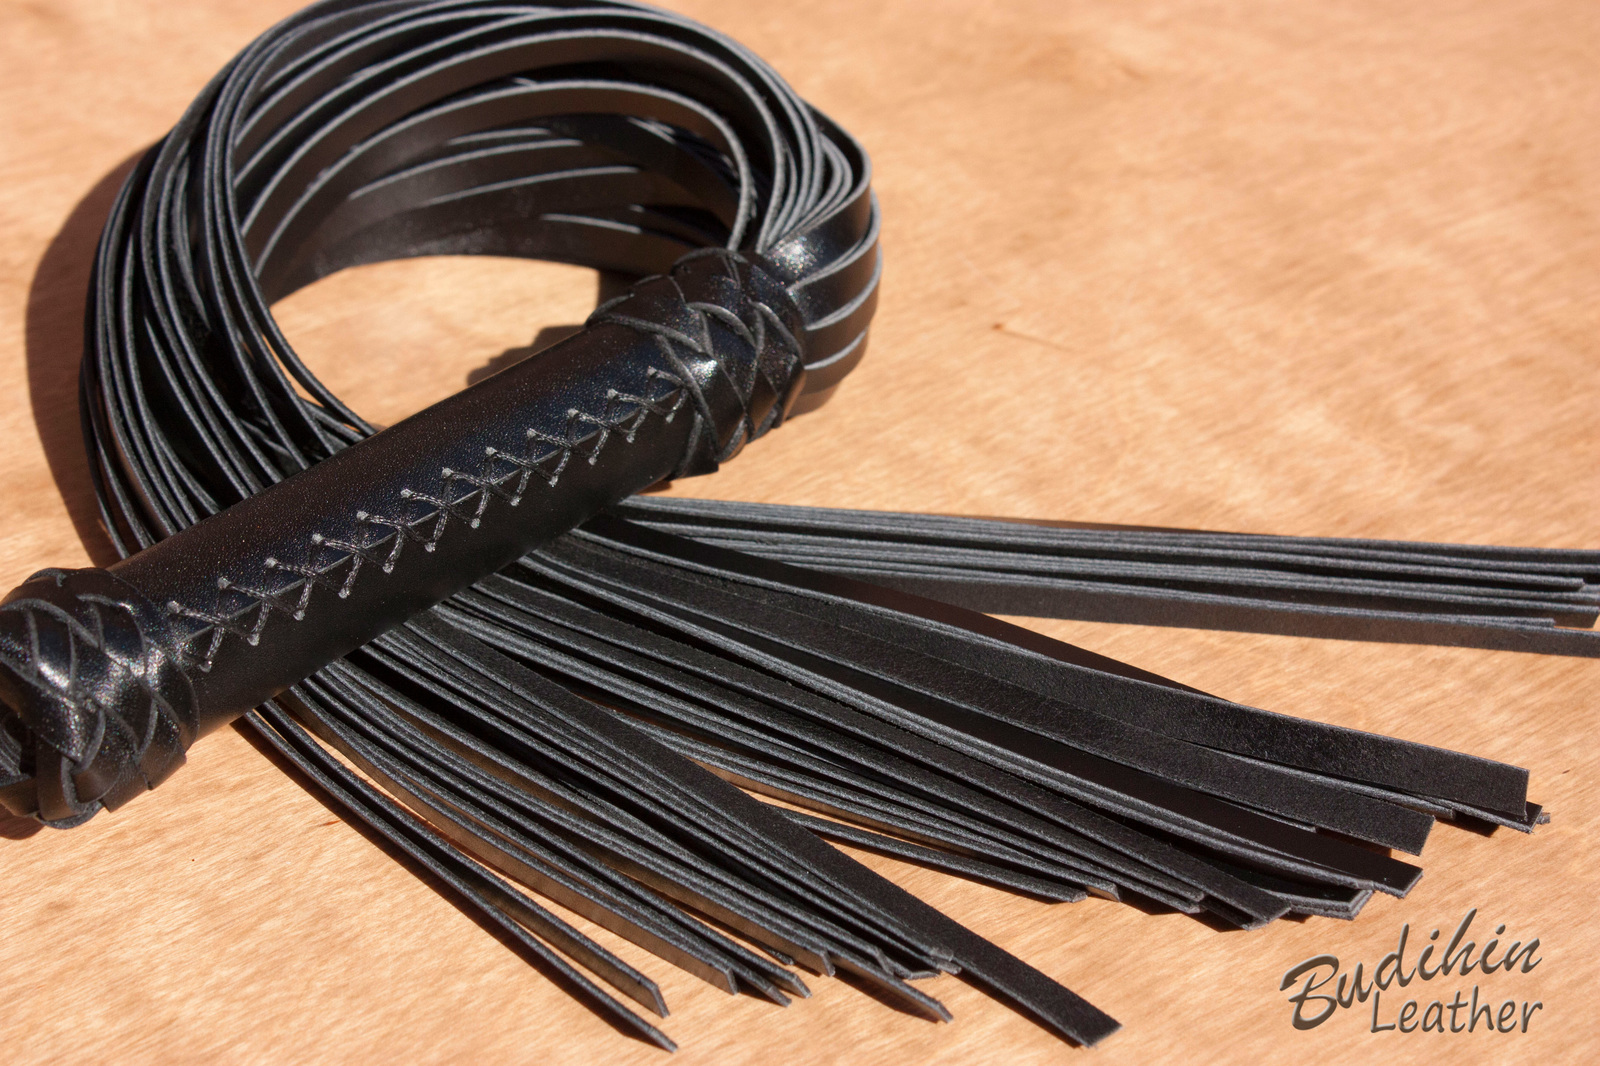 Flogger - My, BDSM, Flogger, Whip, Role-playing games, Leather, Handmade, Longpost, Lash